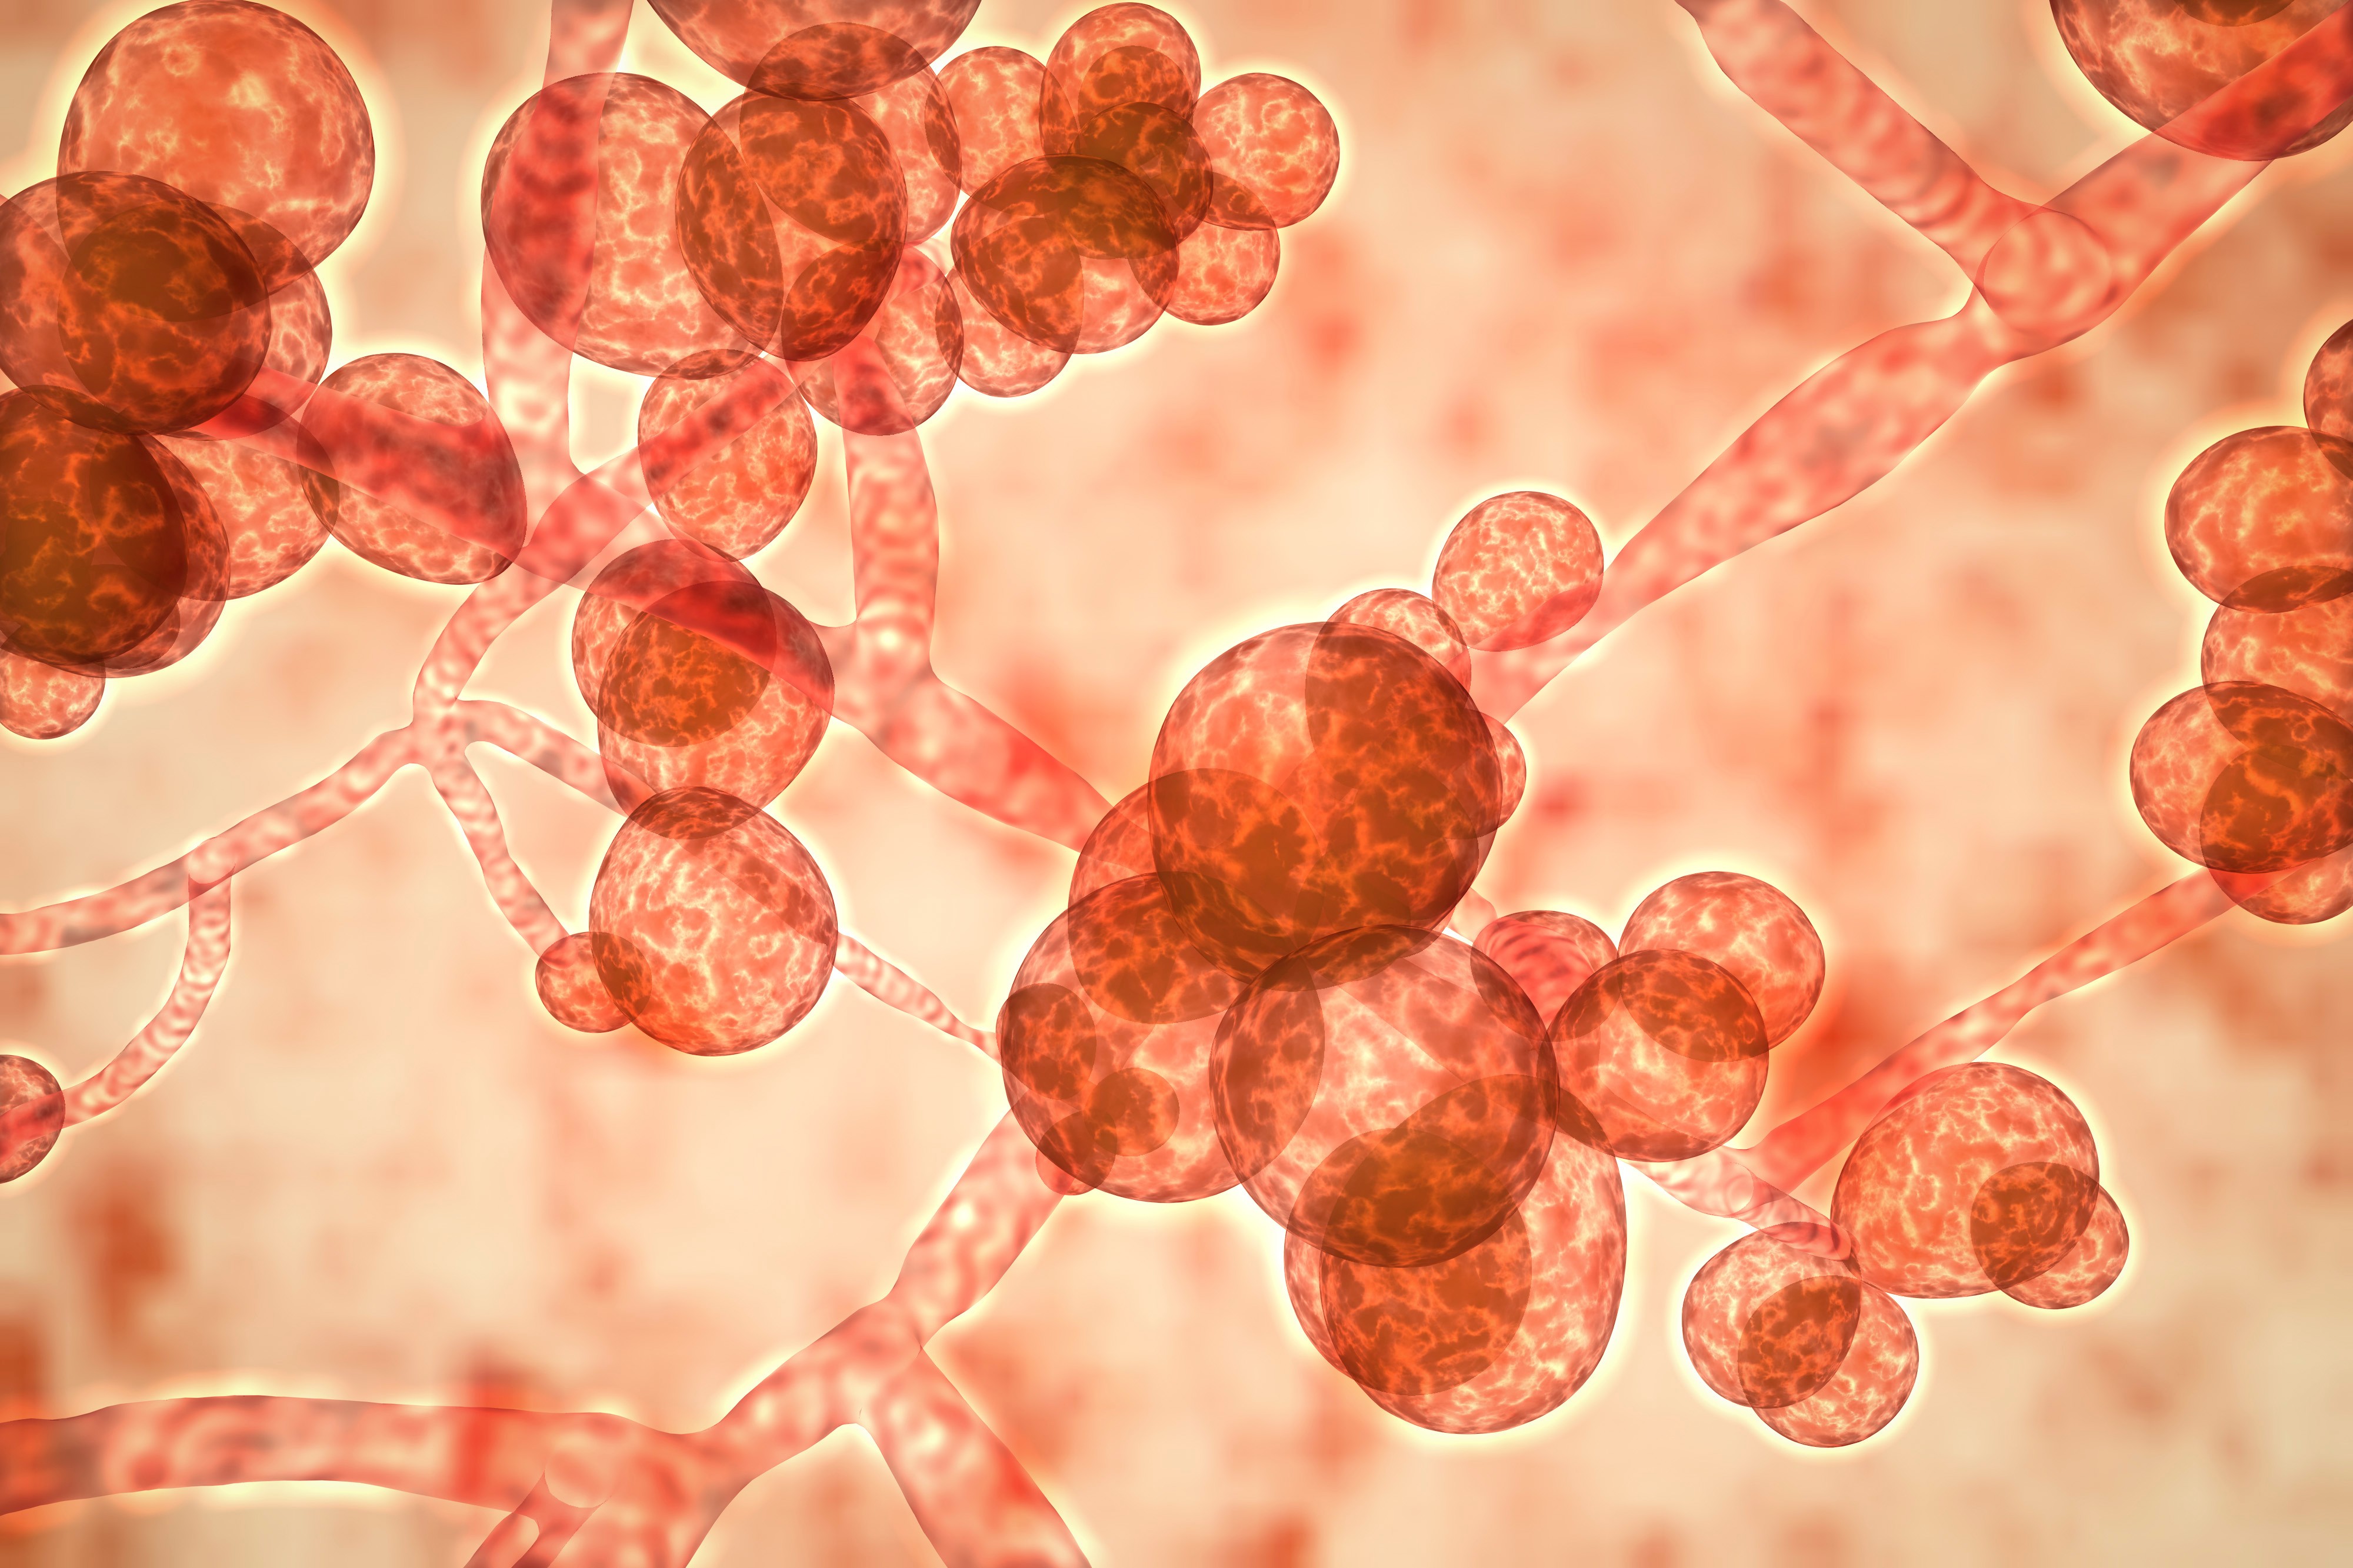 Health chiefs in Hong Kong are preparing for a return of the superbug Candida auris. Photo: Shutterstock Images